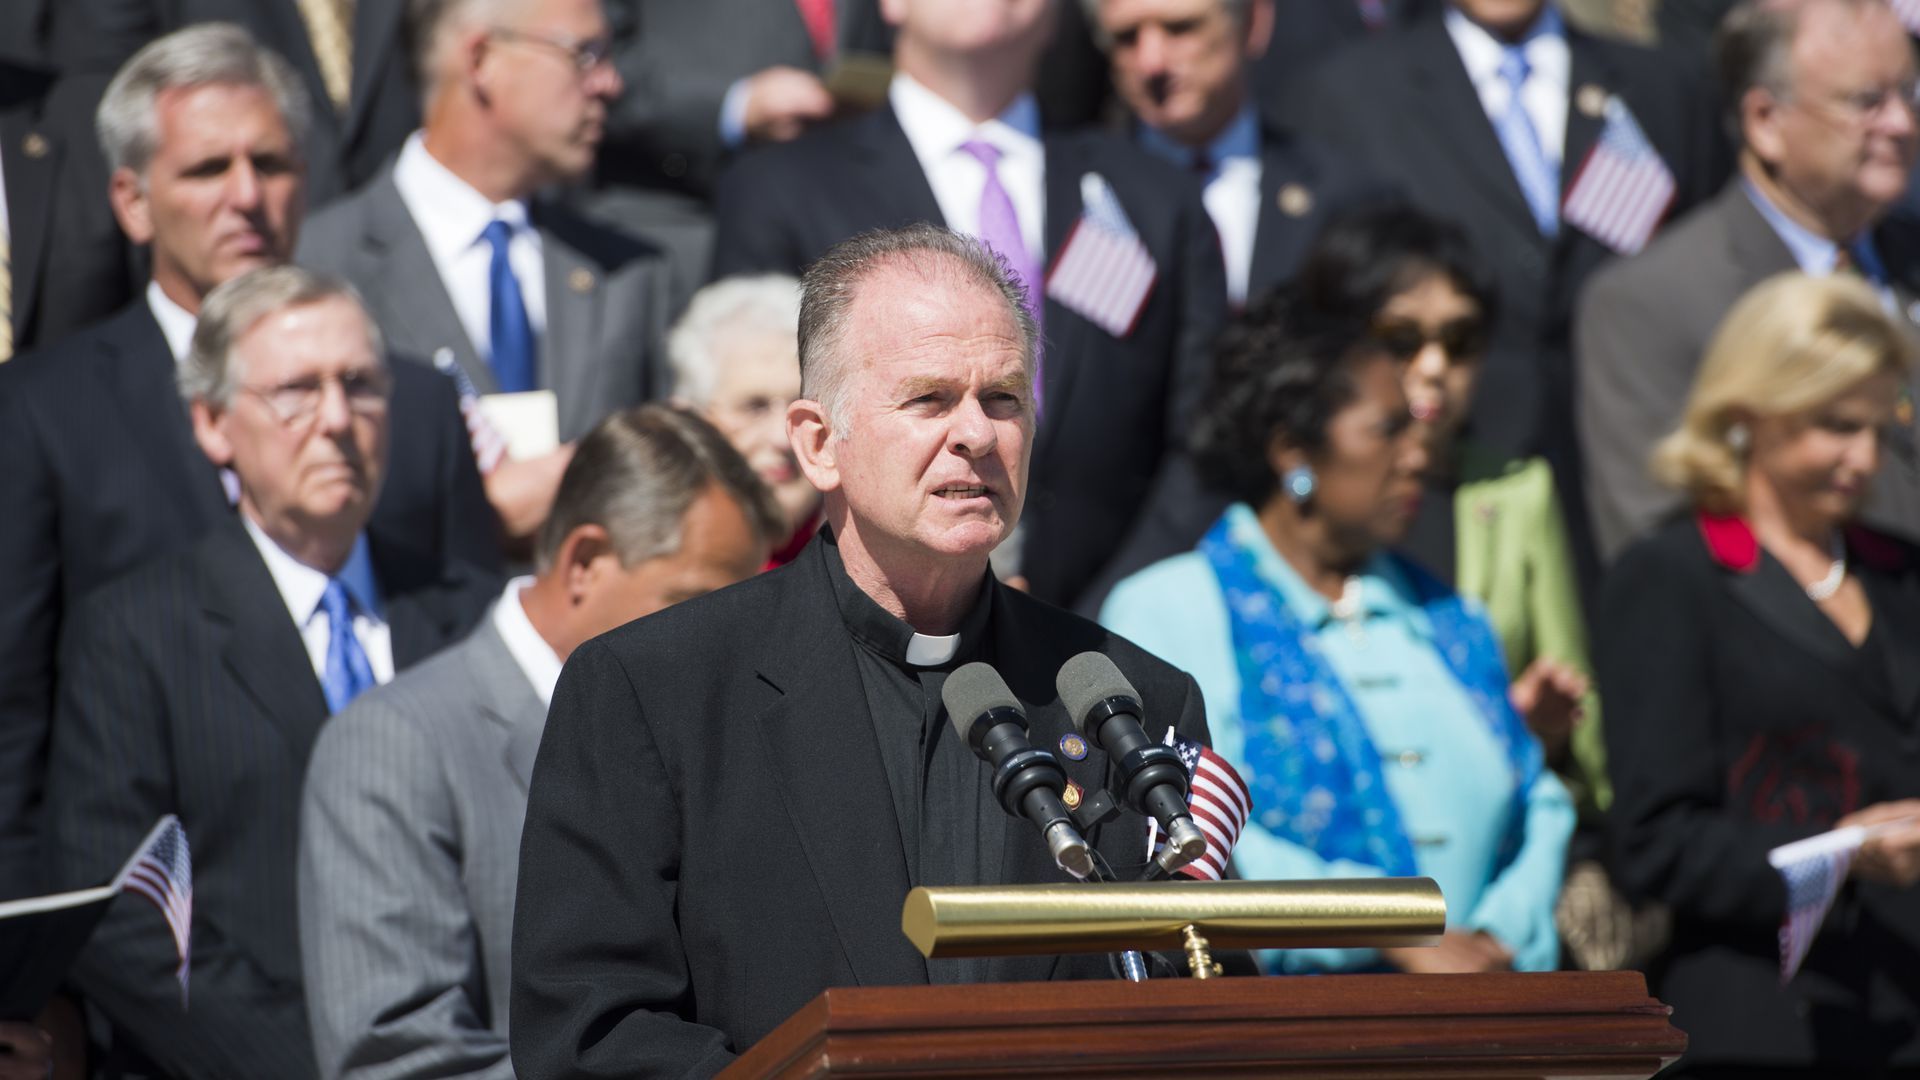 Reverend Patrick J. Conroy, Chaplain of the U.S. House of Representatives, speaks to a crowd from a podium